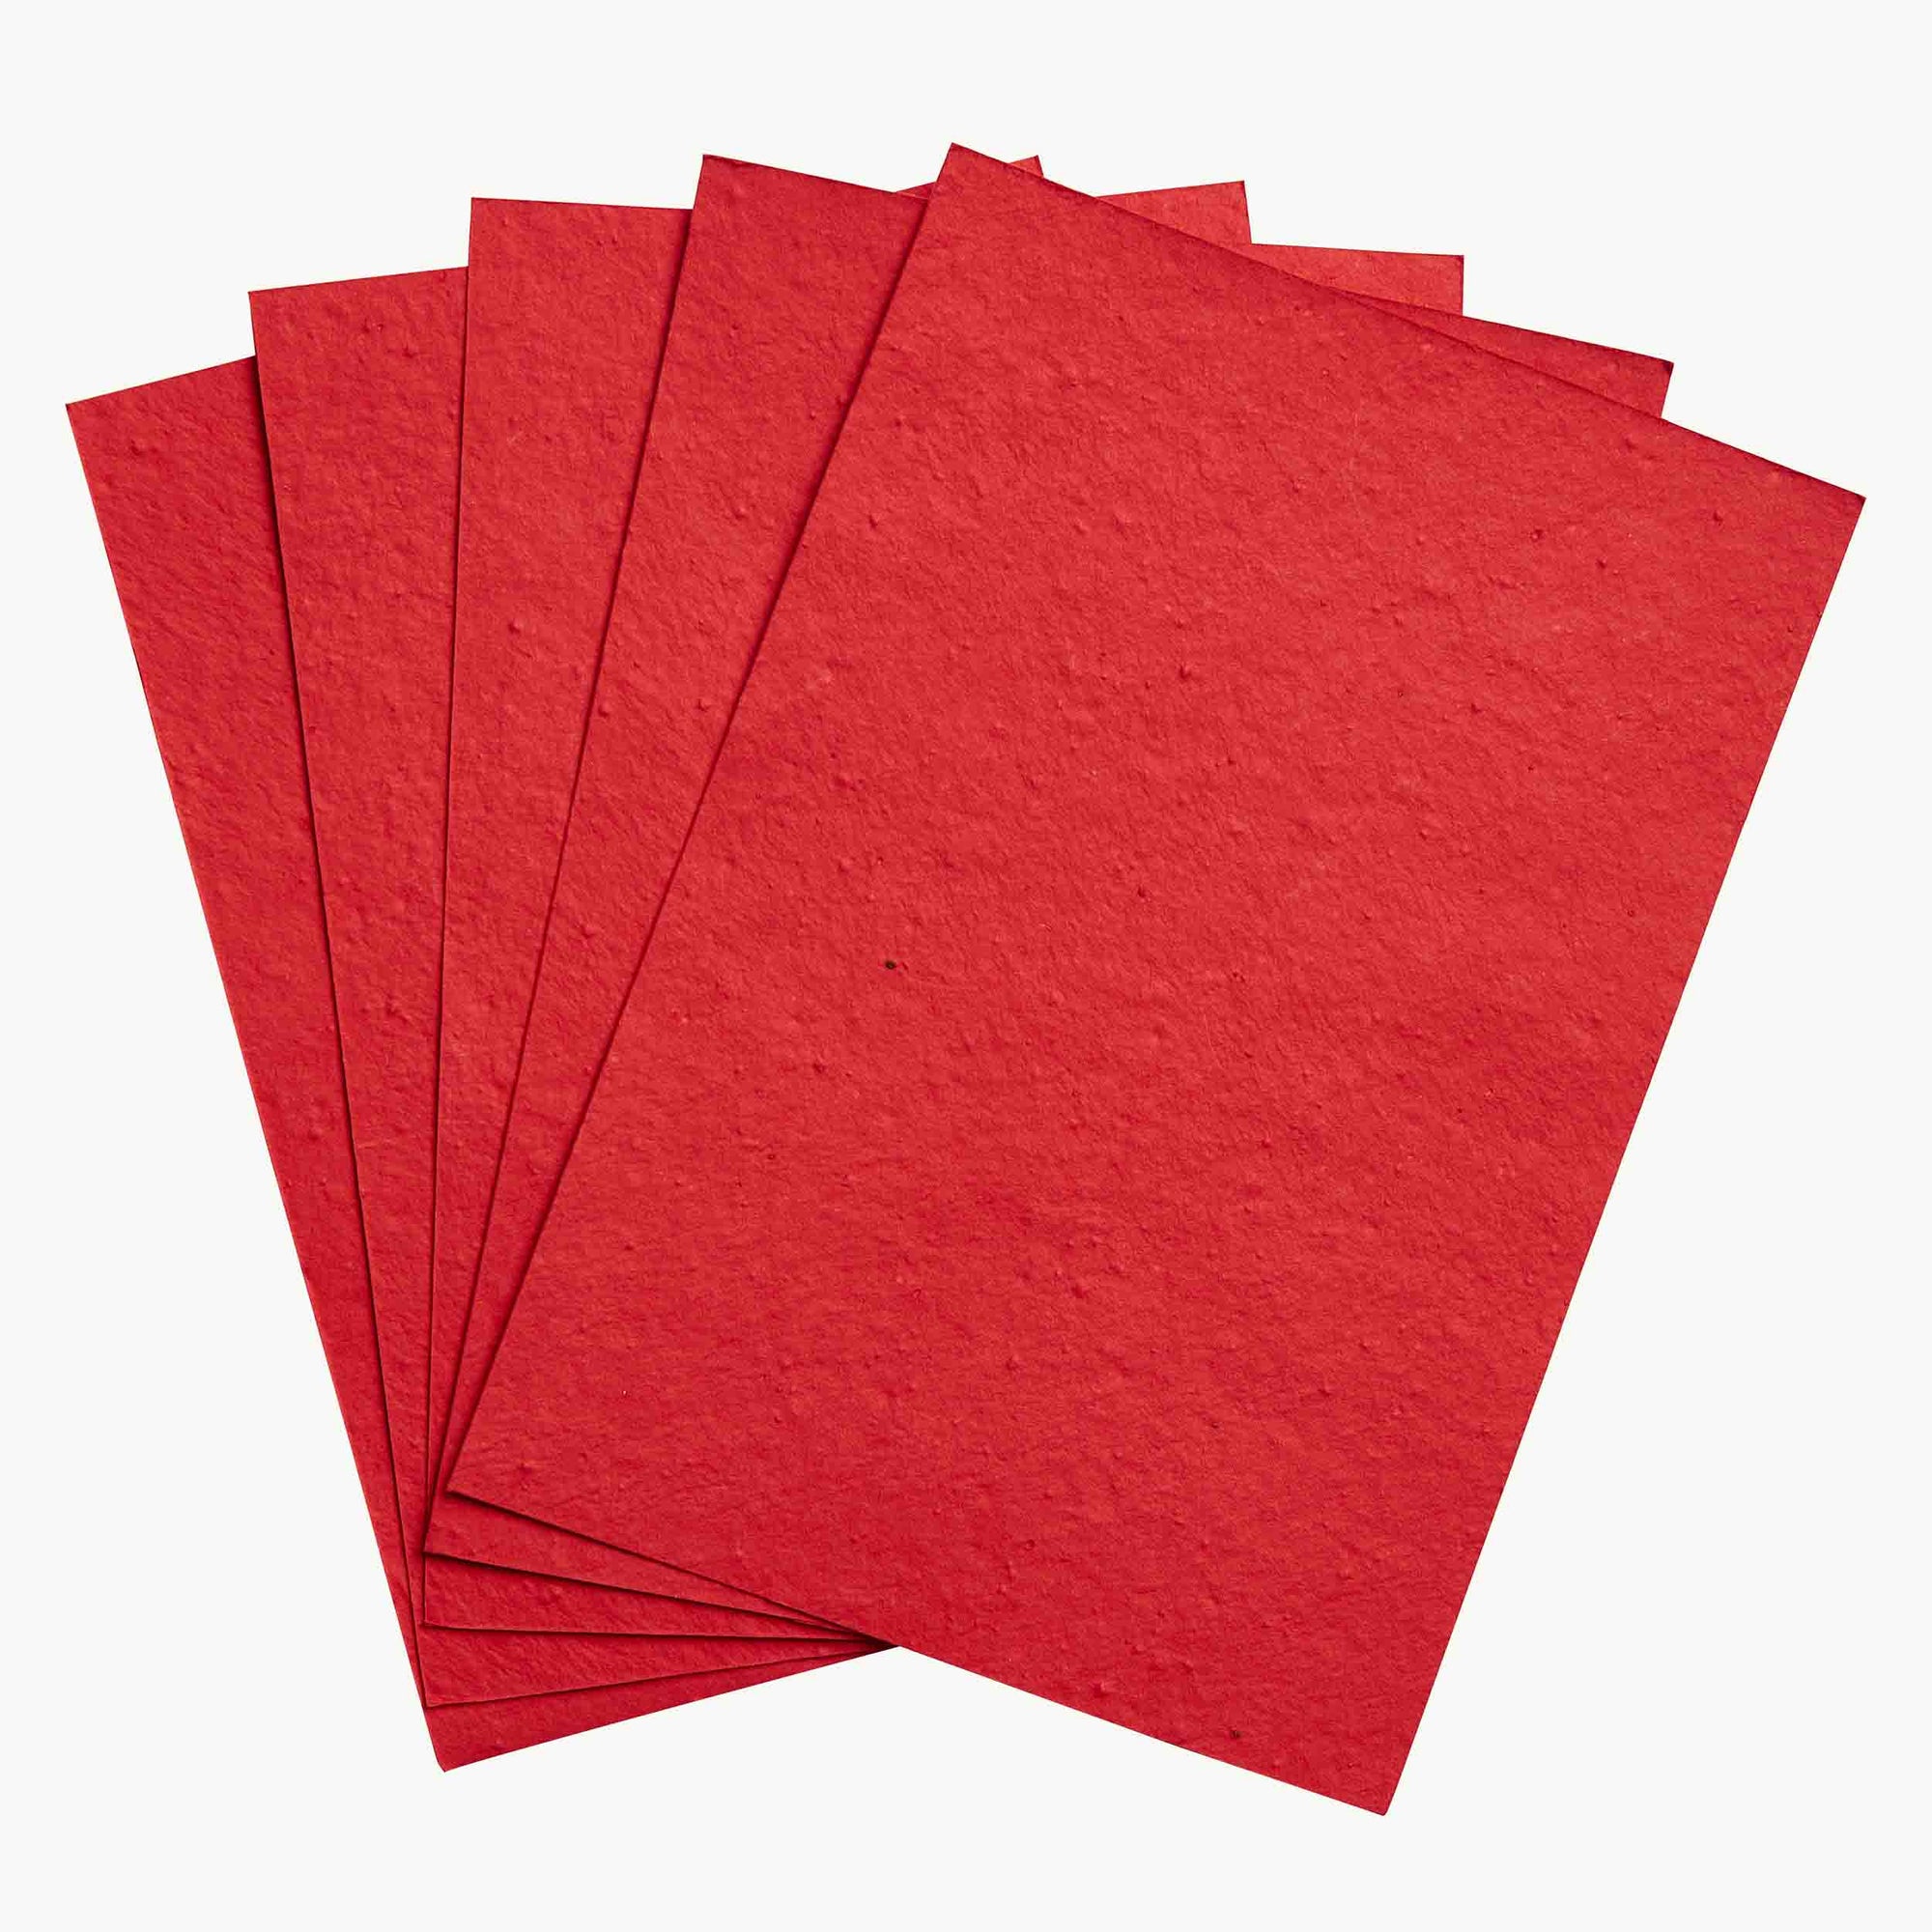 Scarlet mixed wildflowesr seed paper that grows into a plant